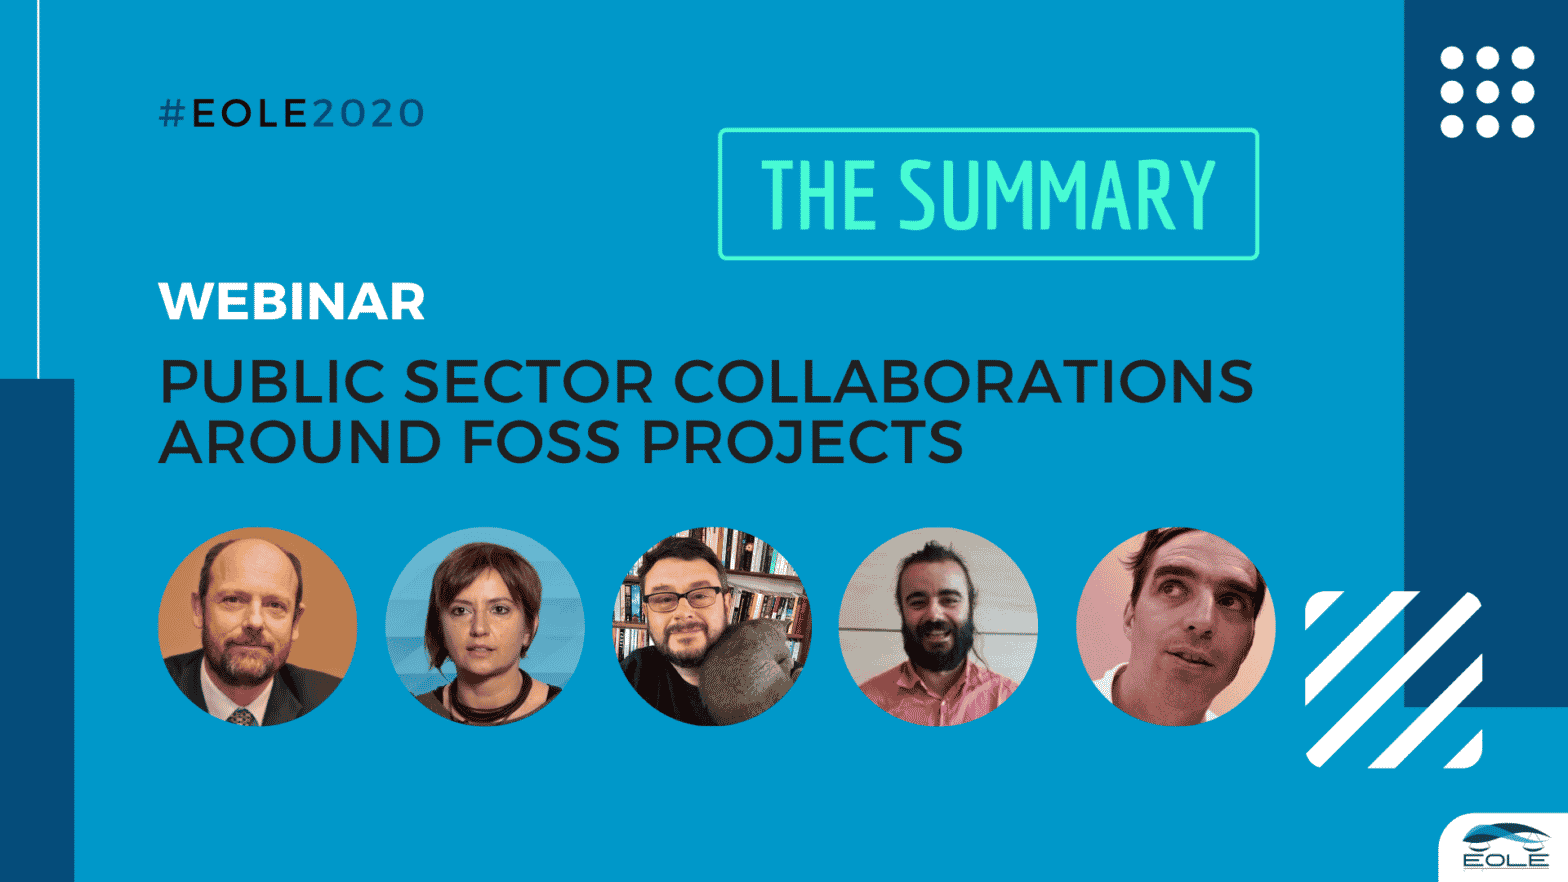 Summary of EOLE’s 2nd webinar : Public sector collaborations around FOSS projects